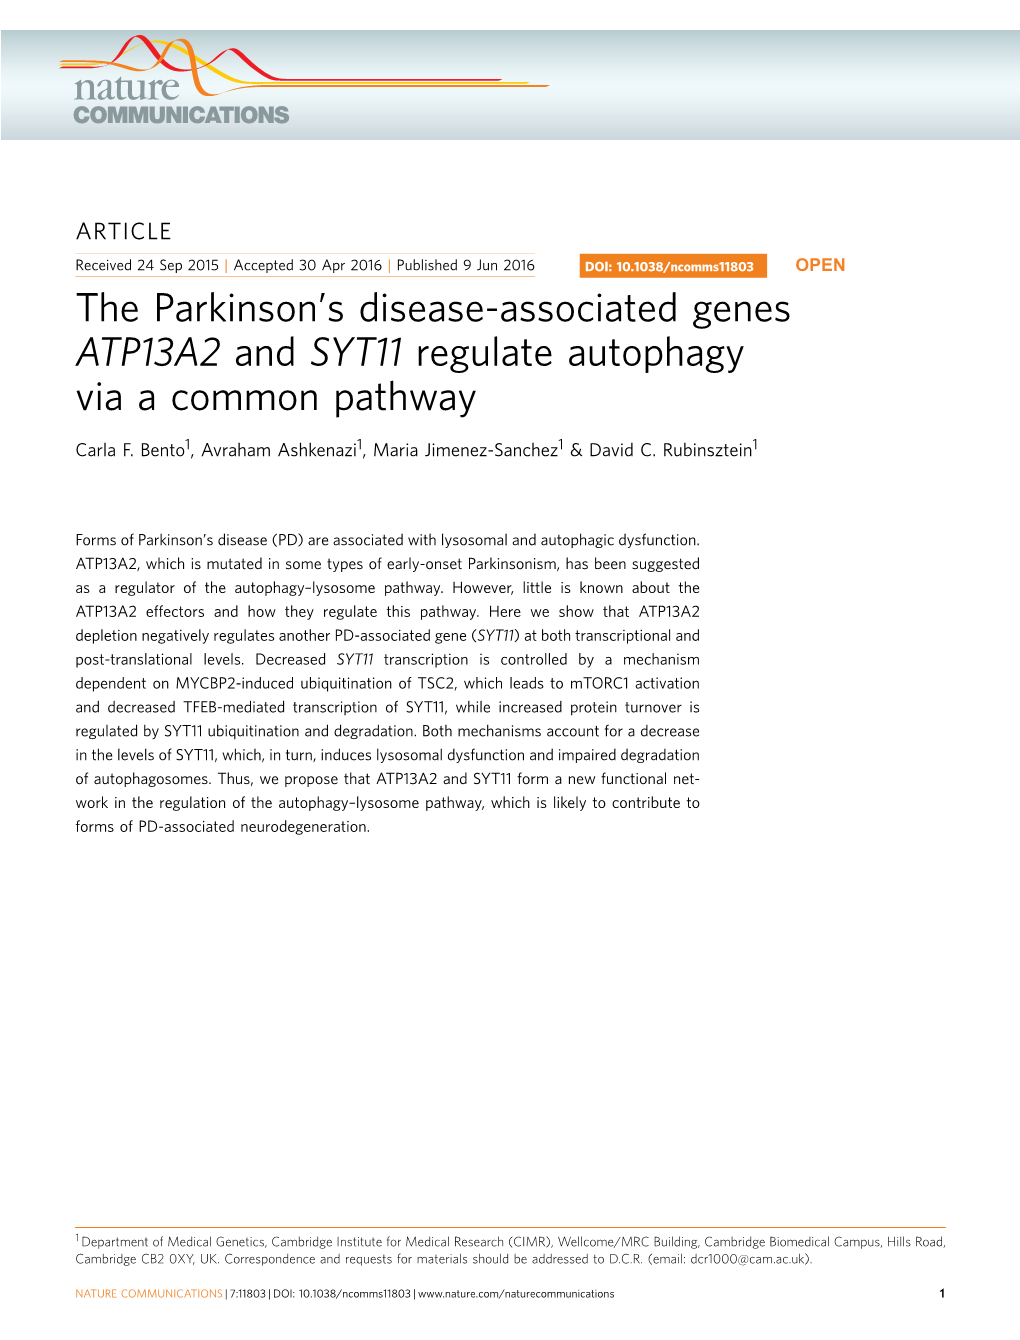 S Disease-Associated Genes ATP13A2 and SYT11 Regulate Autophagy Via a Common Pathway